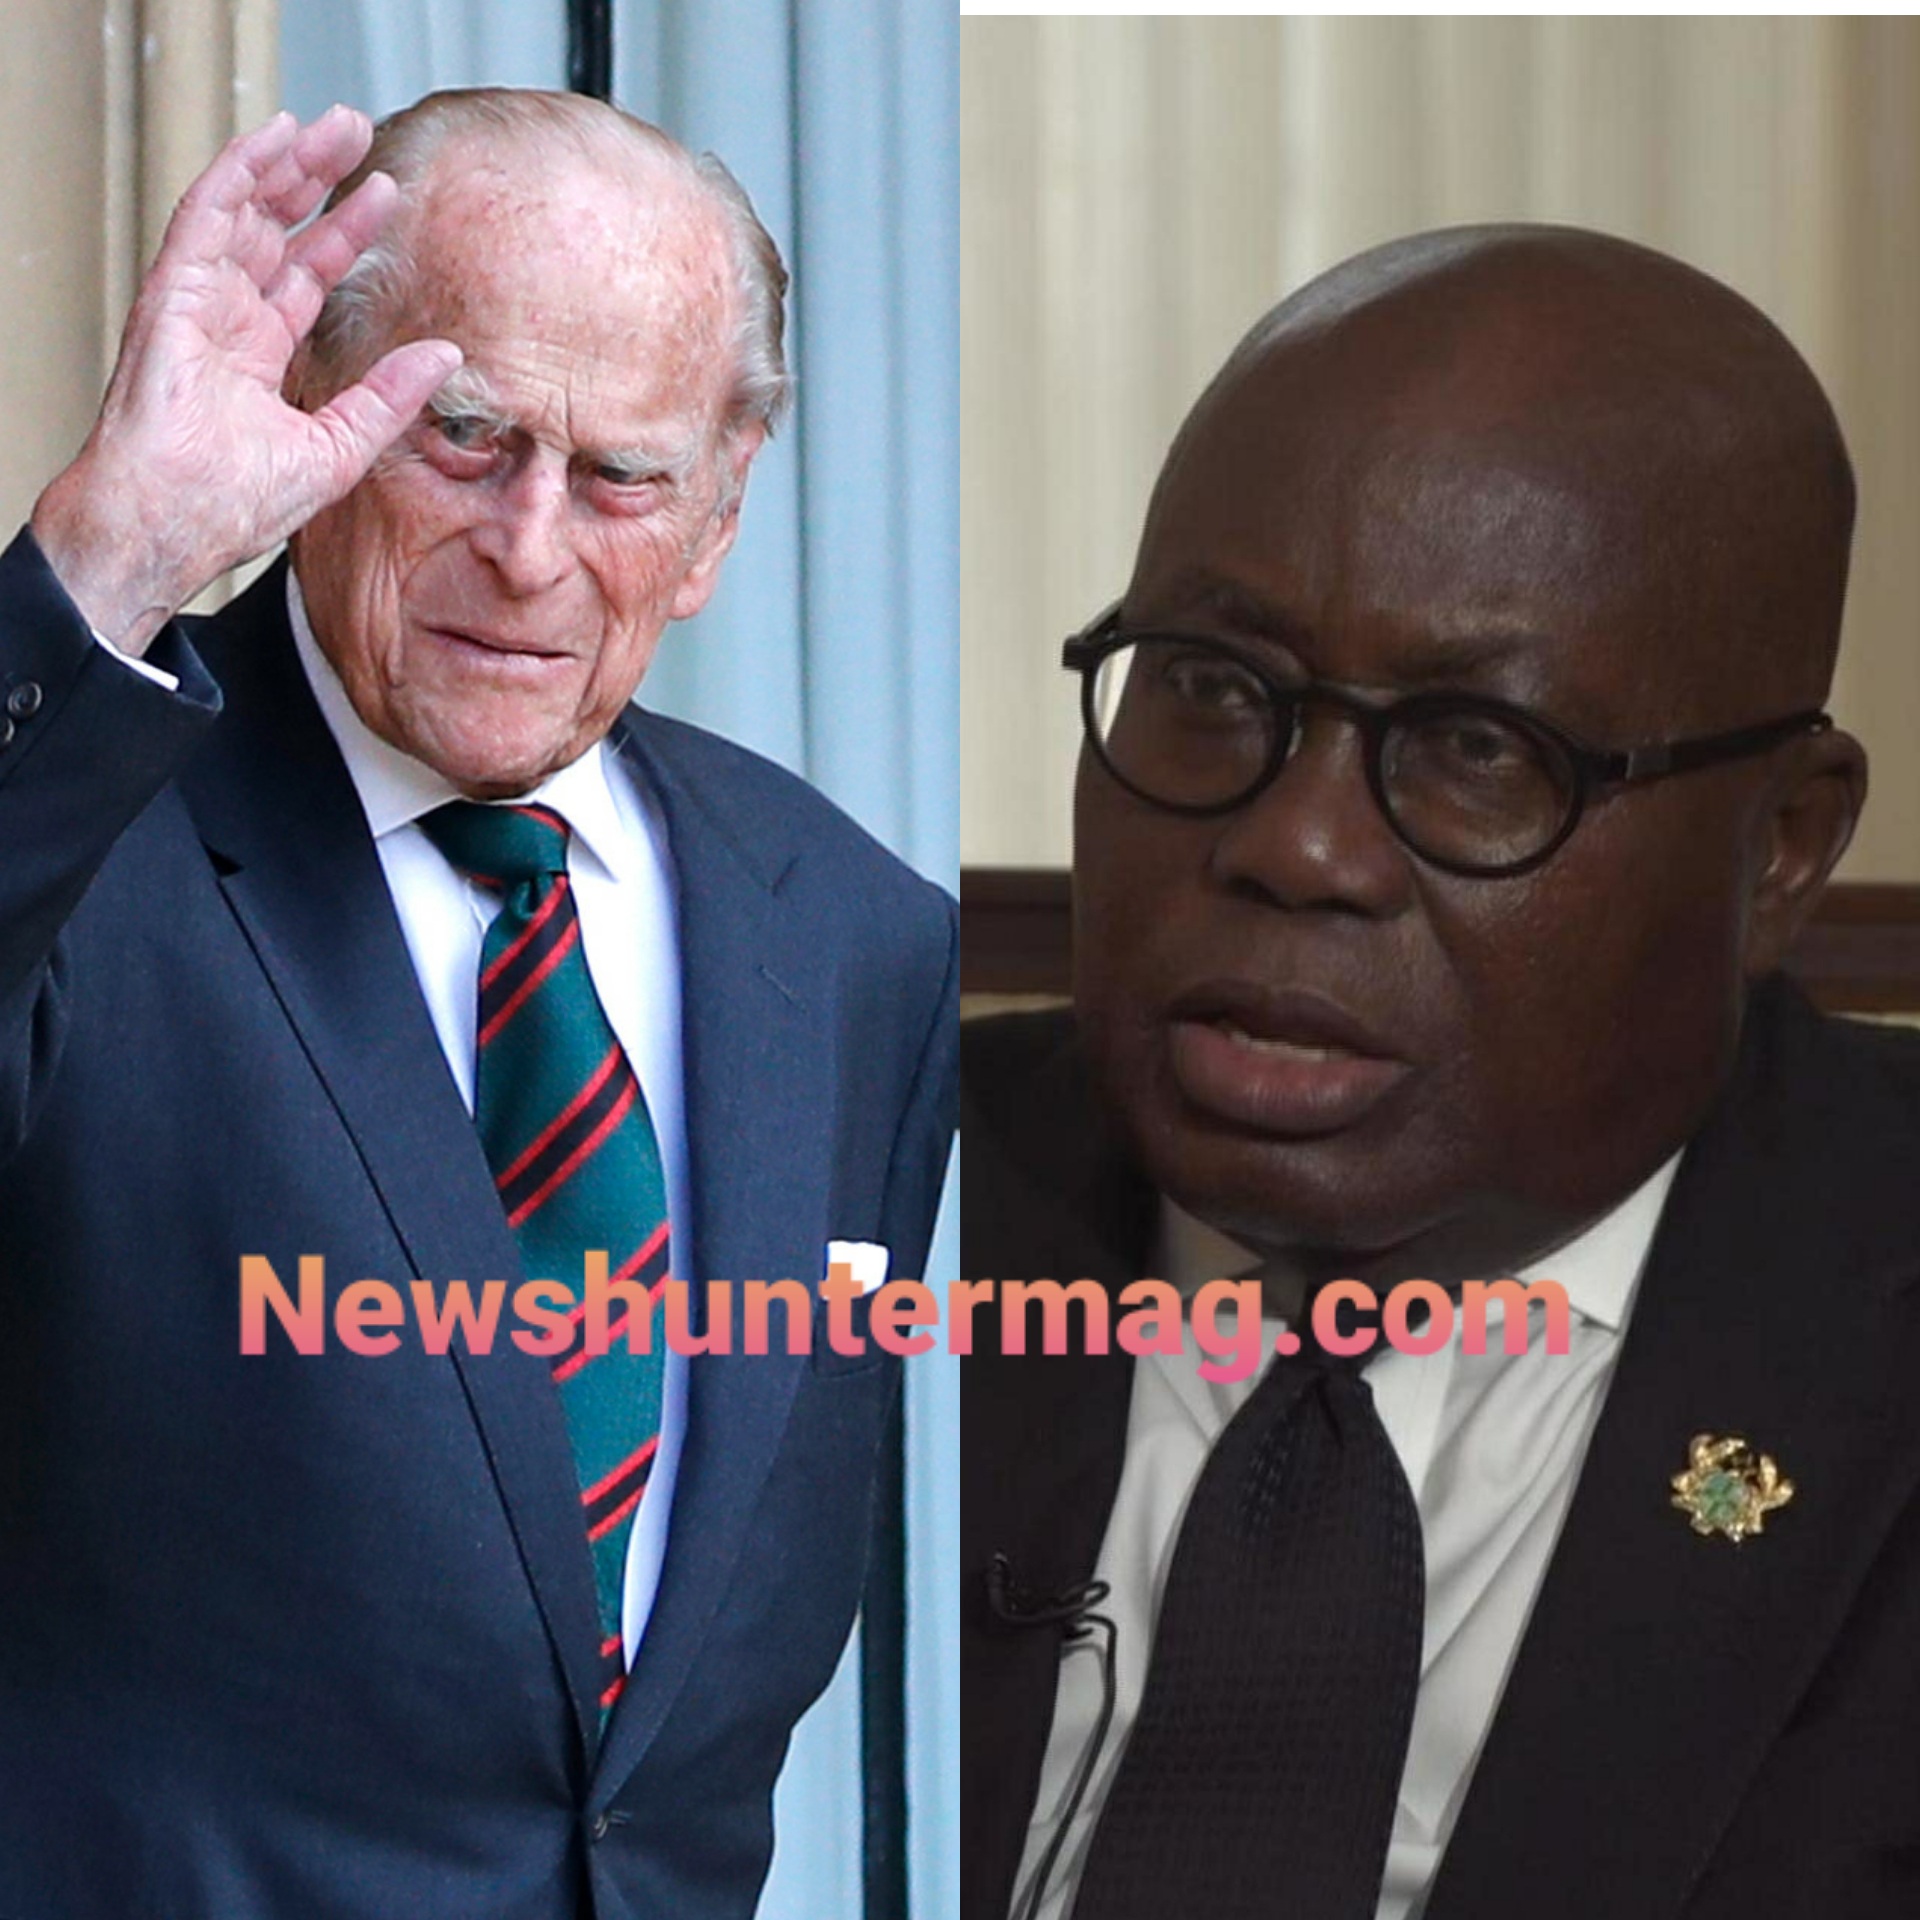 Prince Philip and President Akufo-Addo